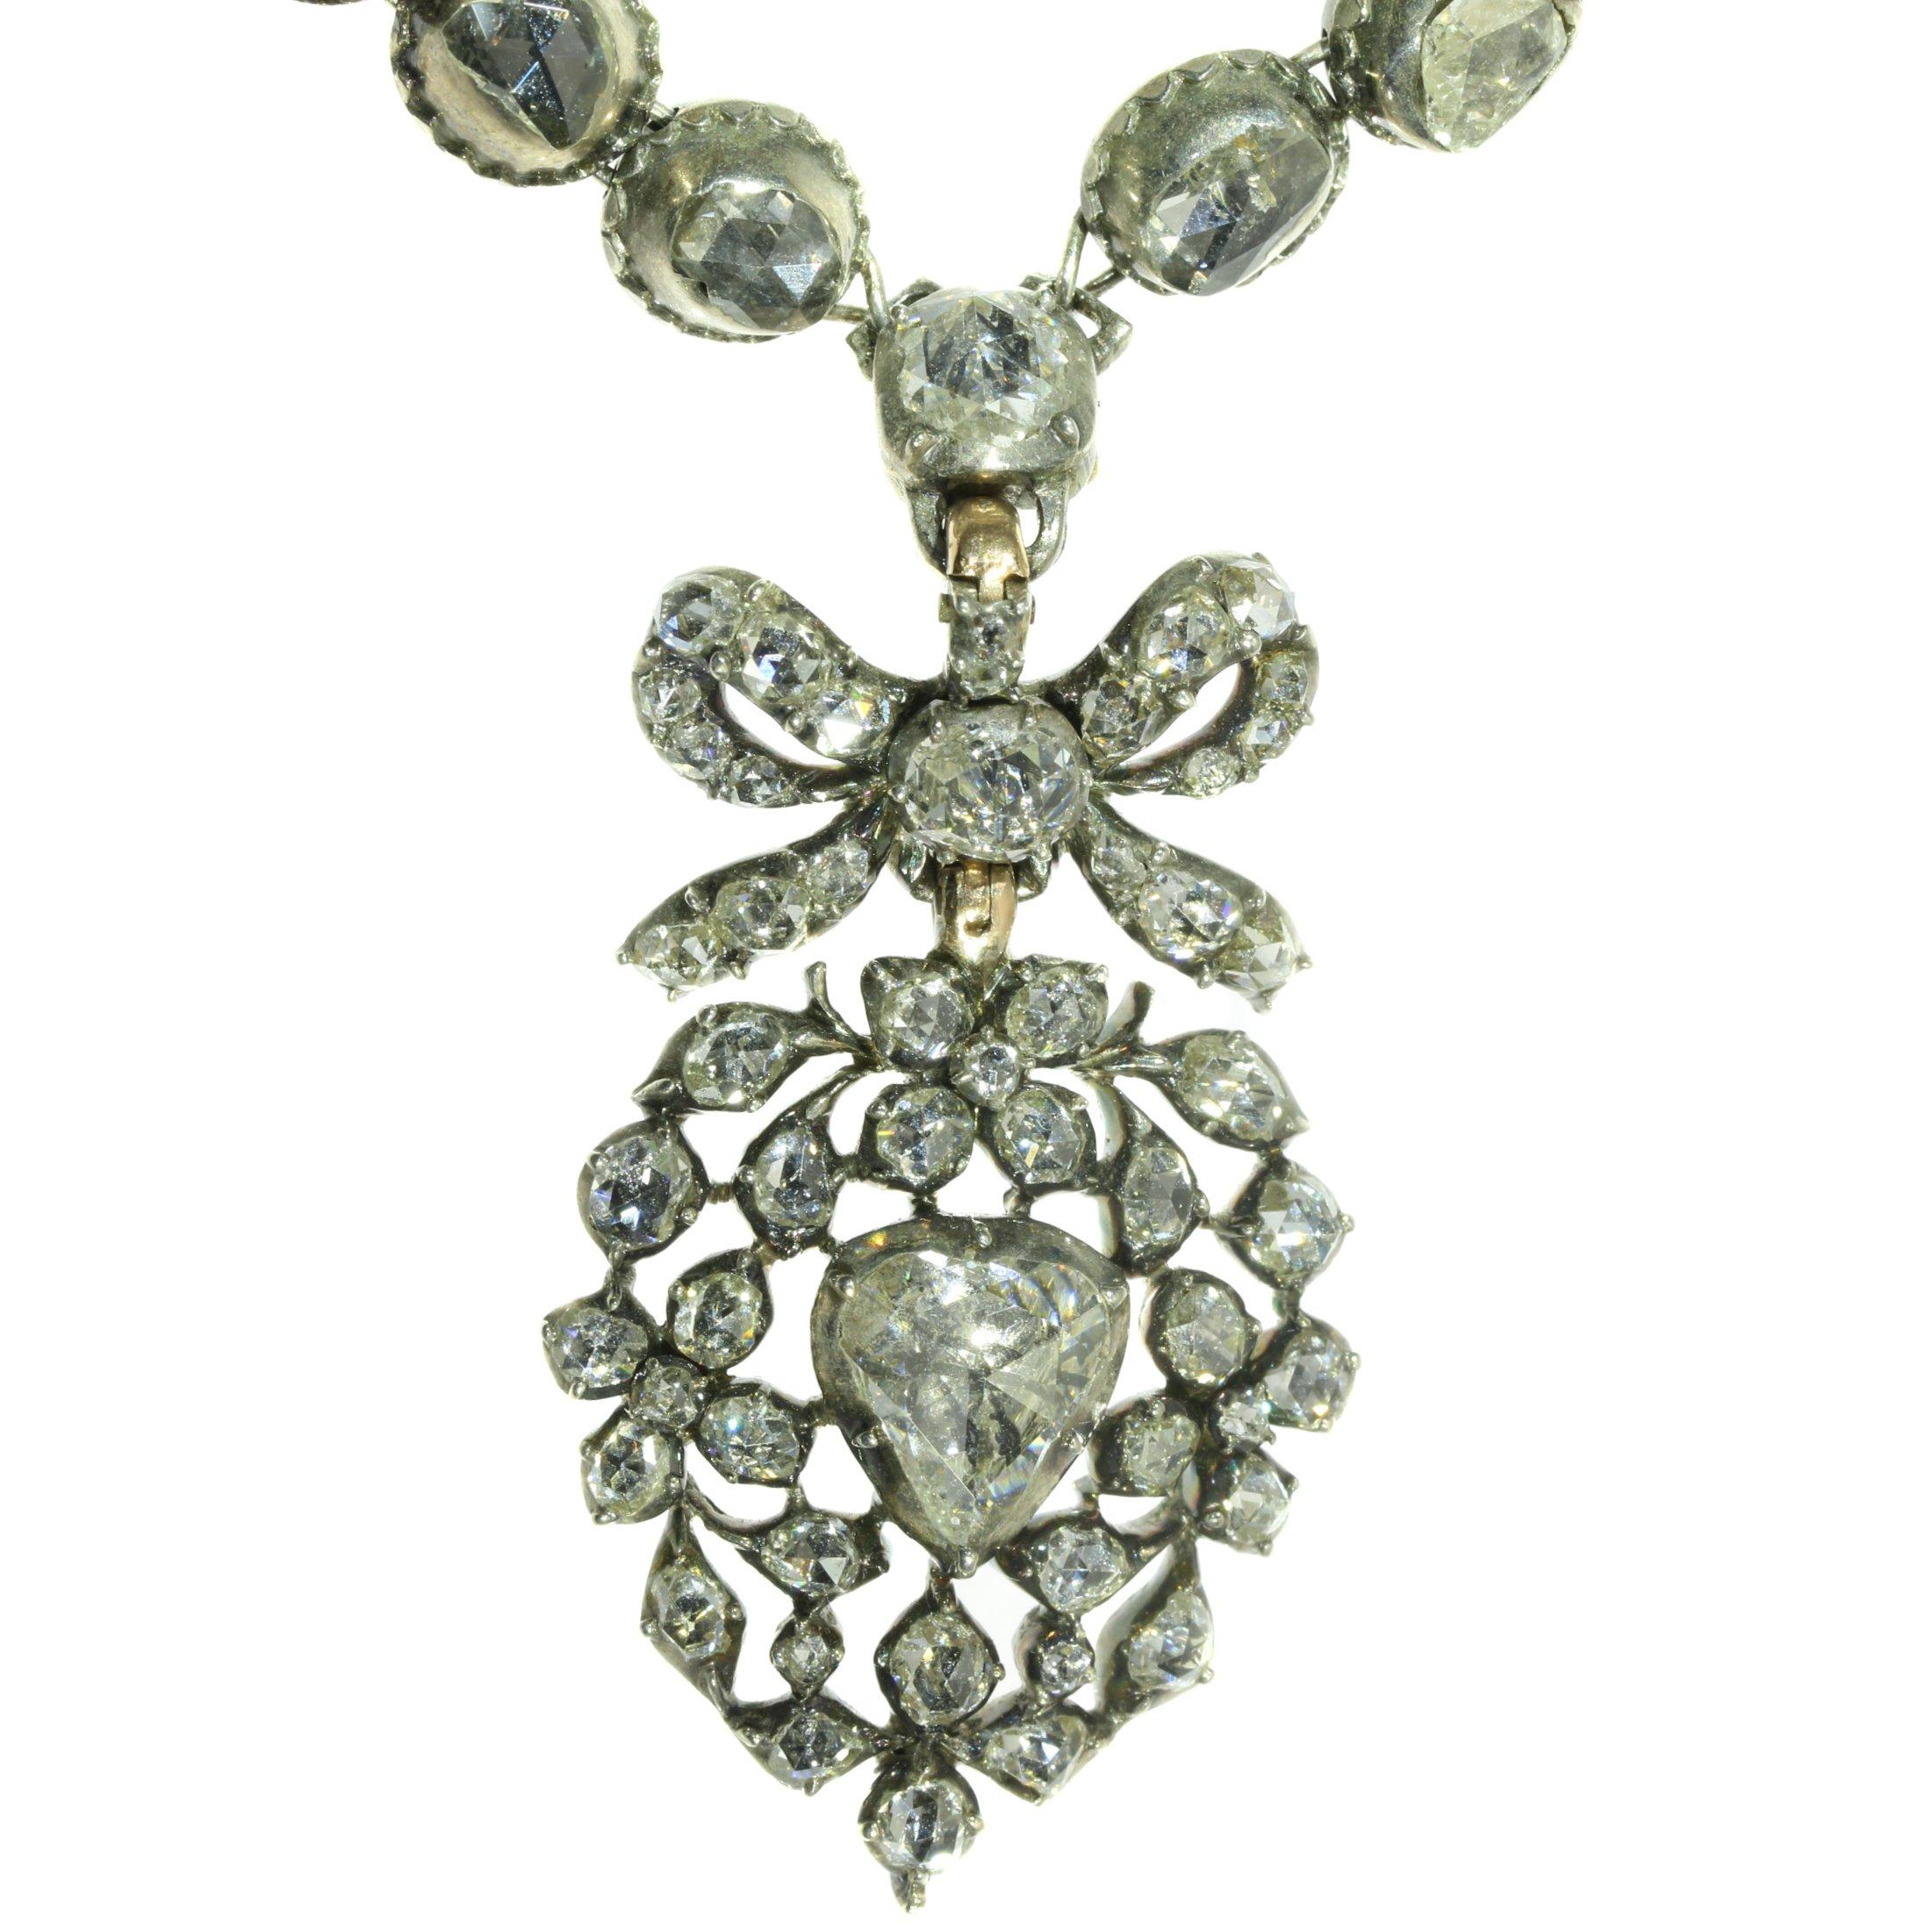 Women's or Men's Rose Cut Diamond Riviere Necklace with a Diamond Set Crowned Heart Pendant